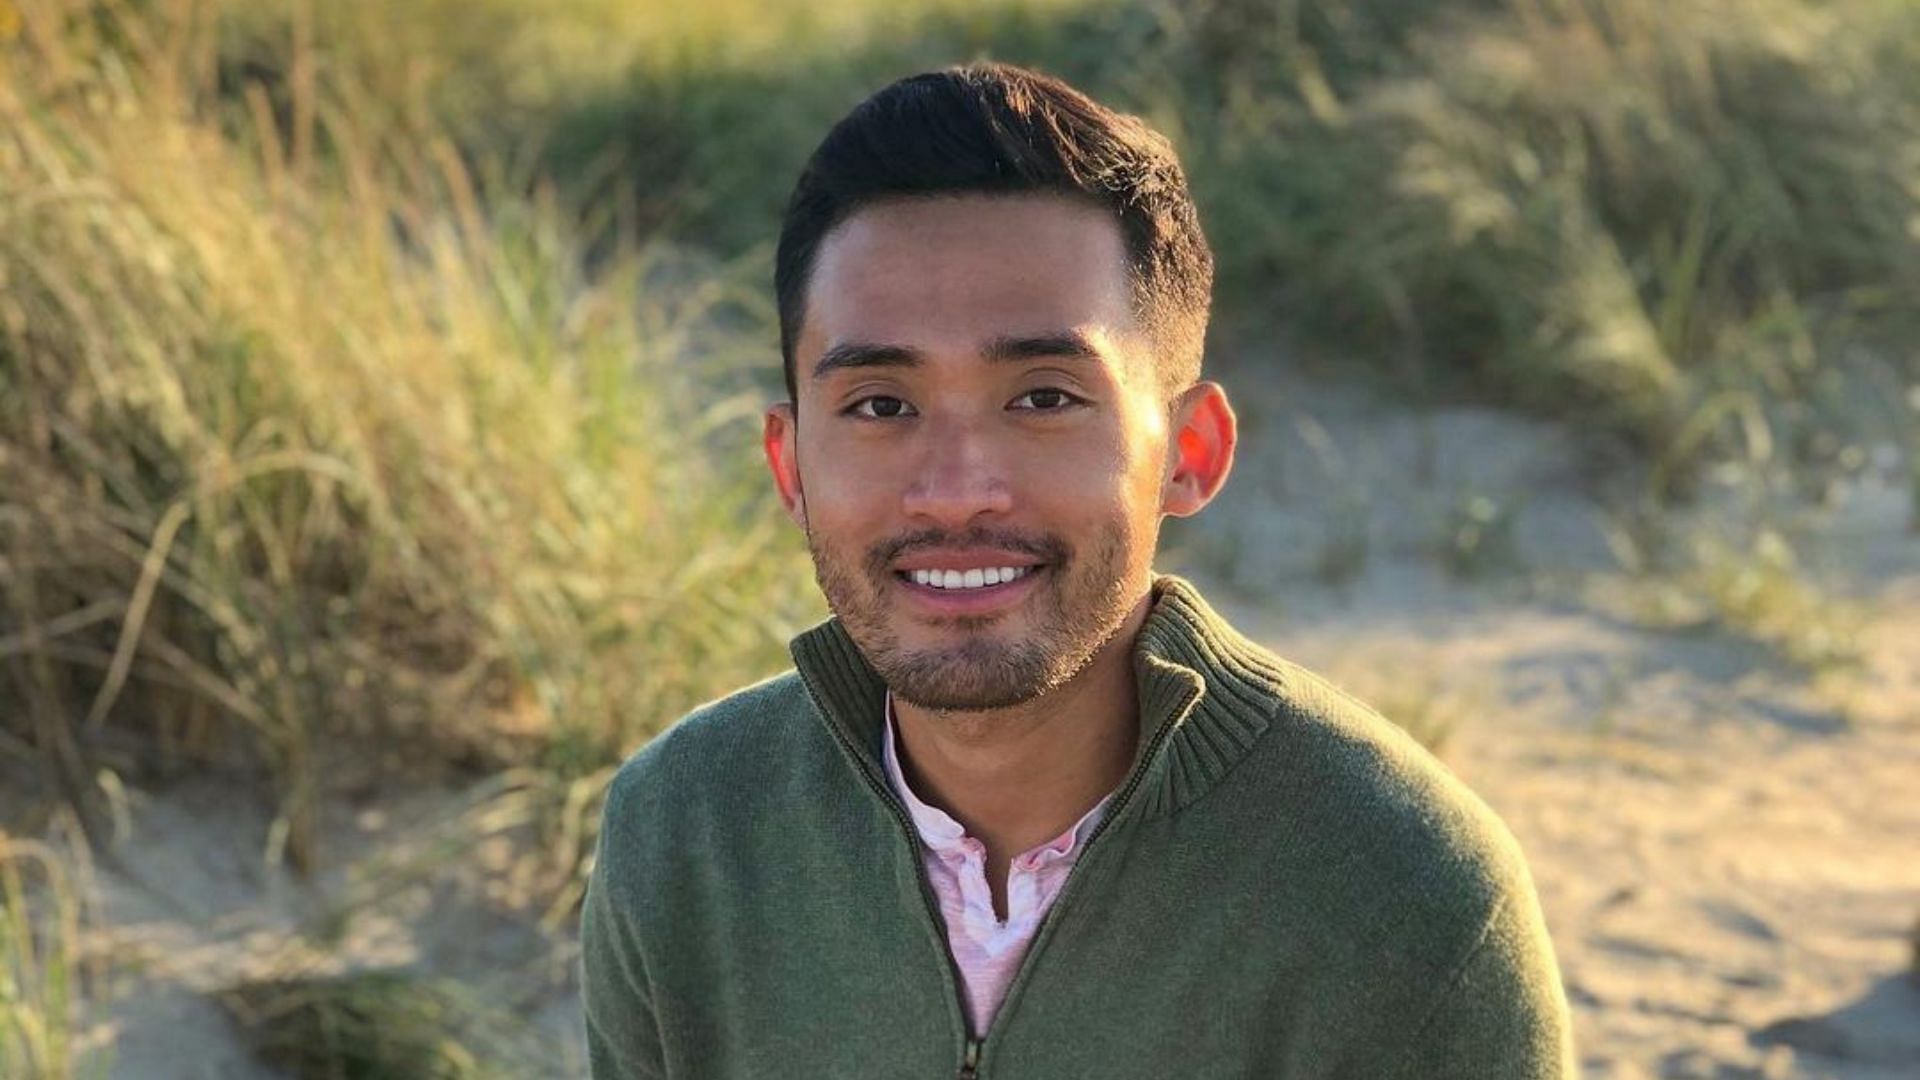 Who is Hai Giang from Survivor 42? Data Scientist was the first person to pursue college from his family